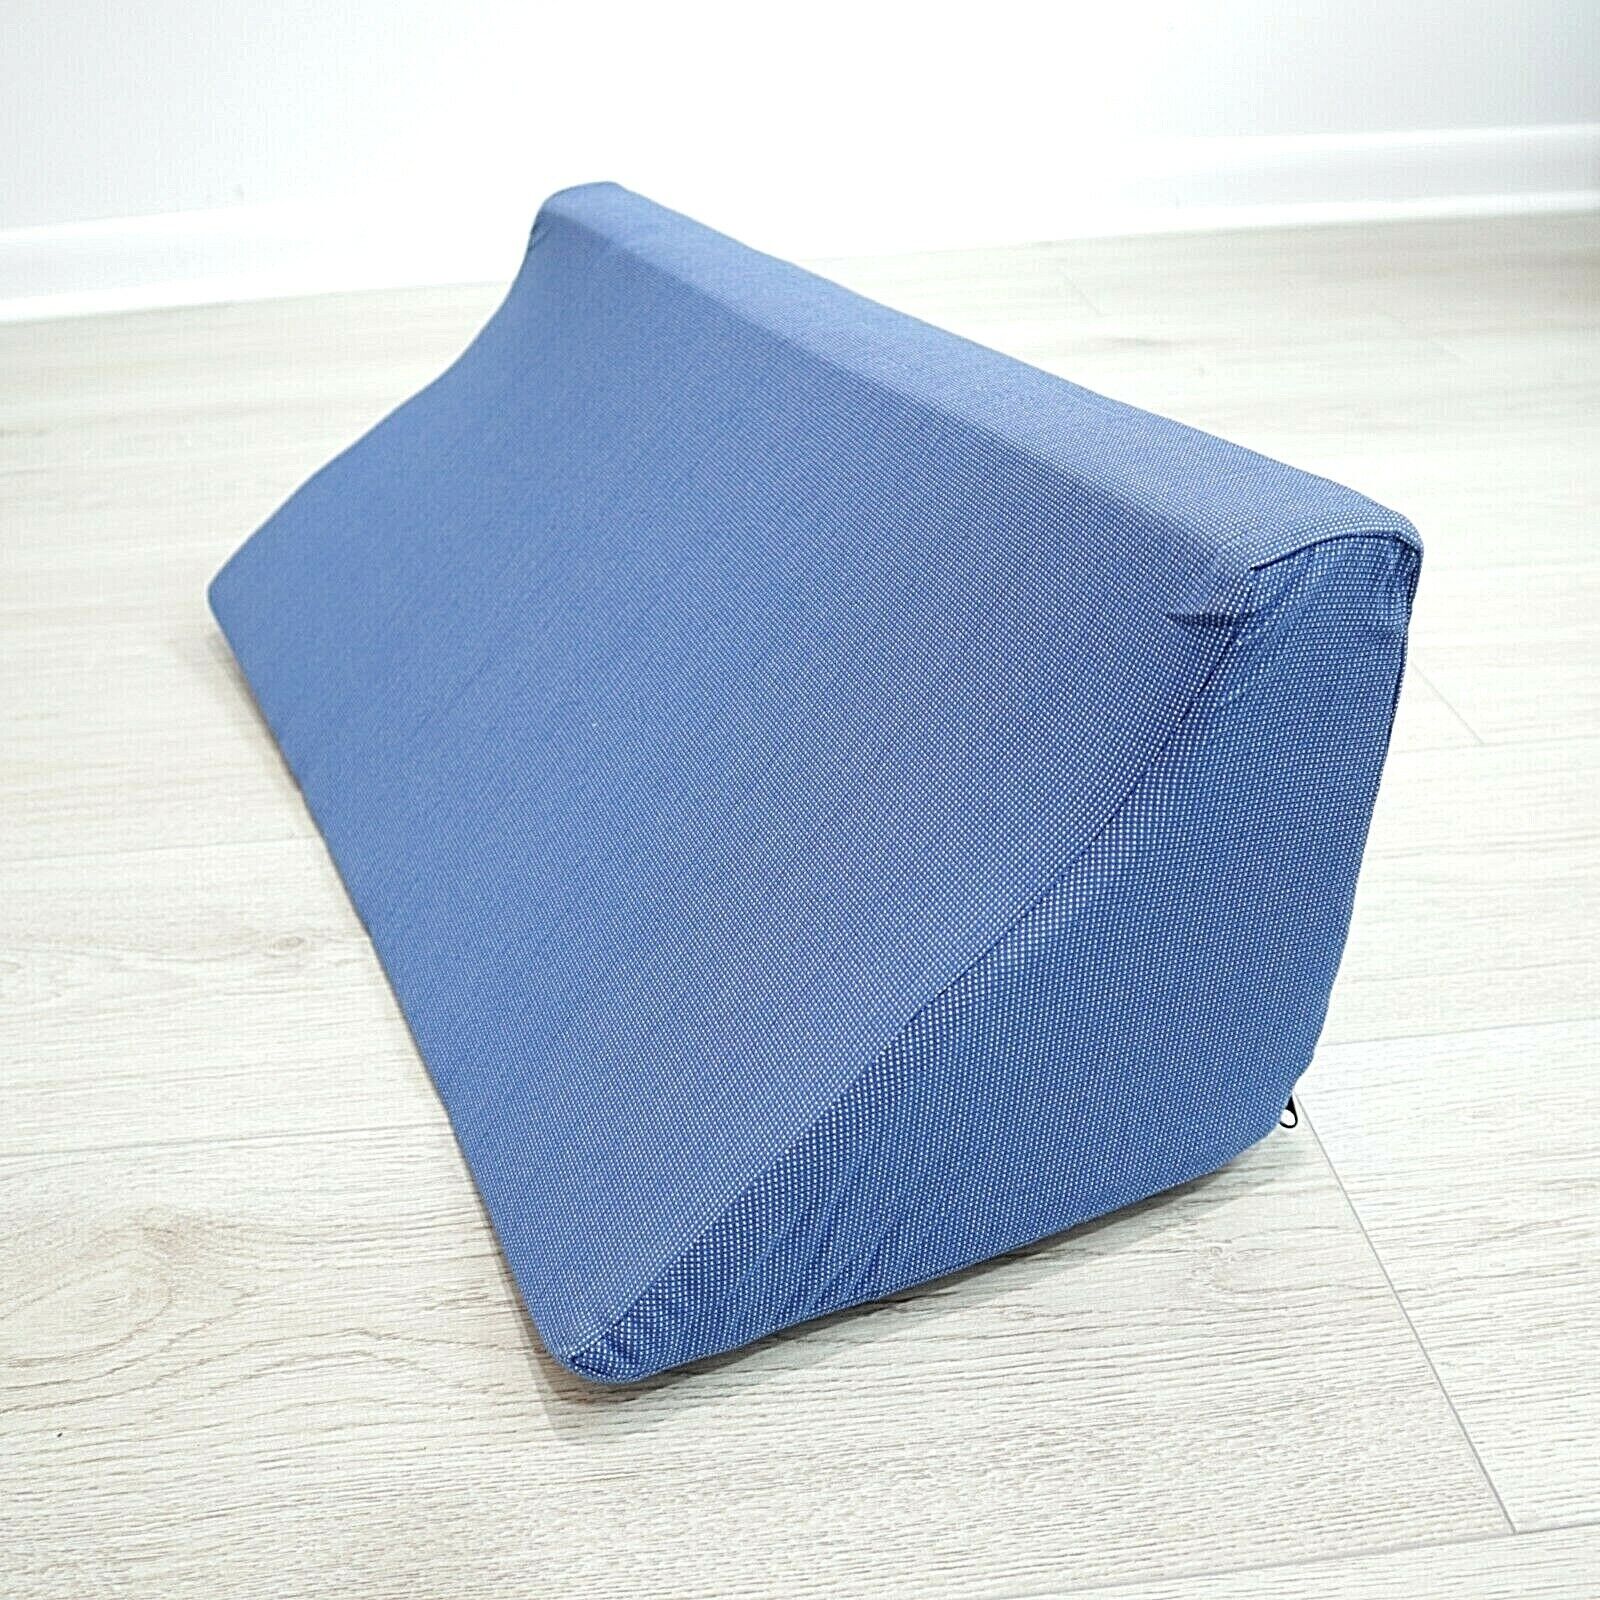 Fanwer Wedge Pillow For Sleeping Position + Extra Cover